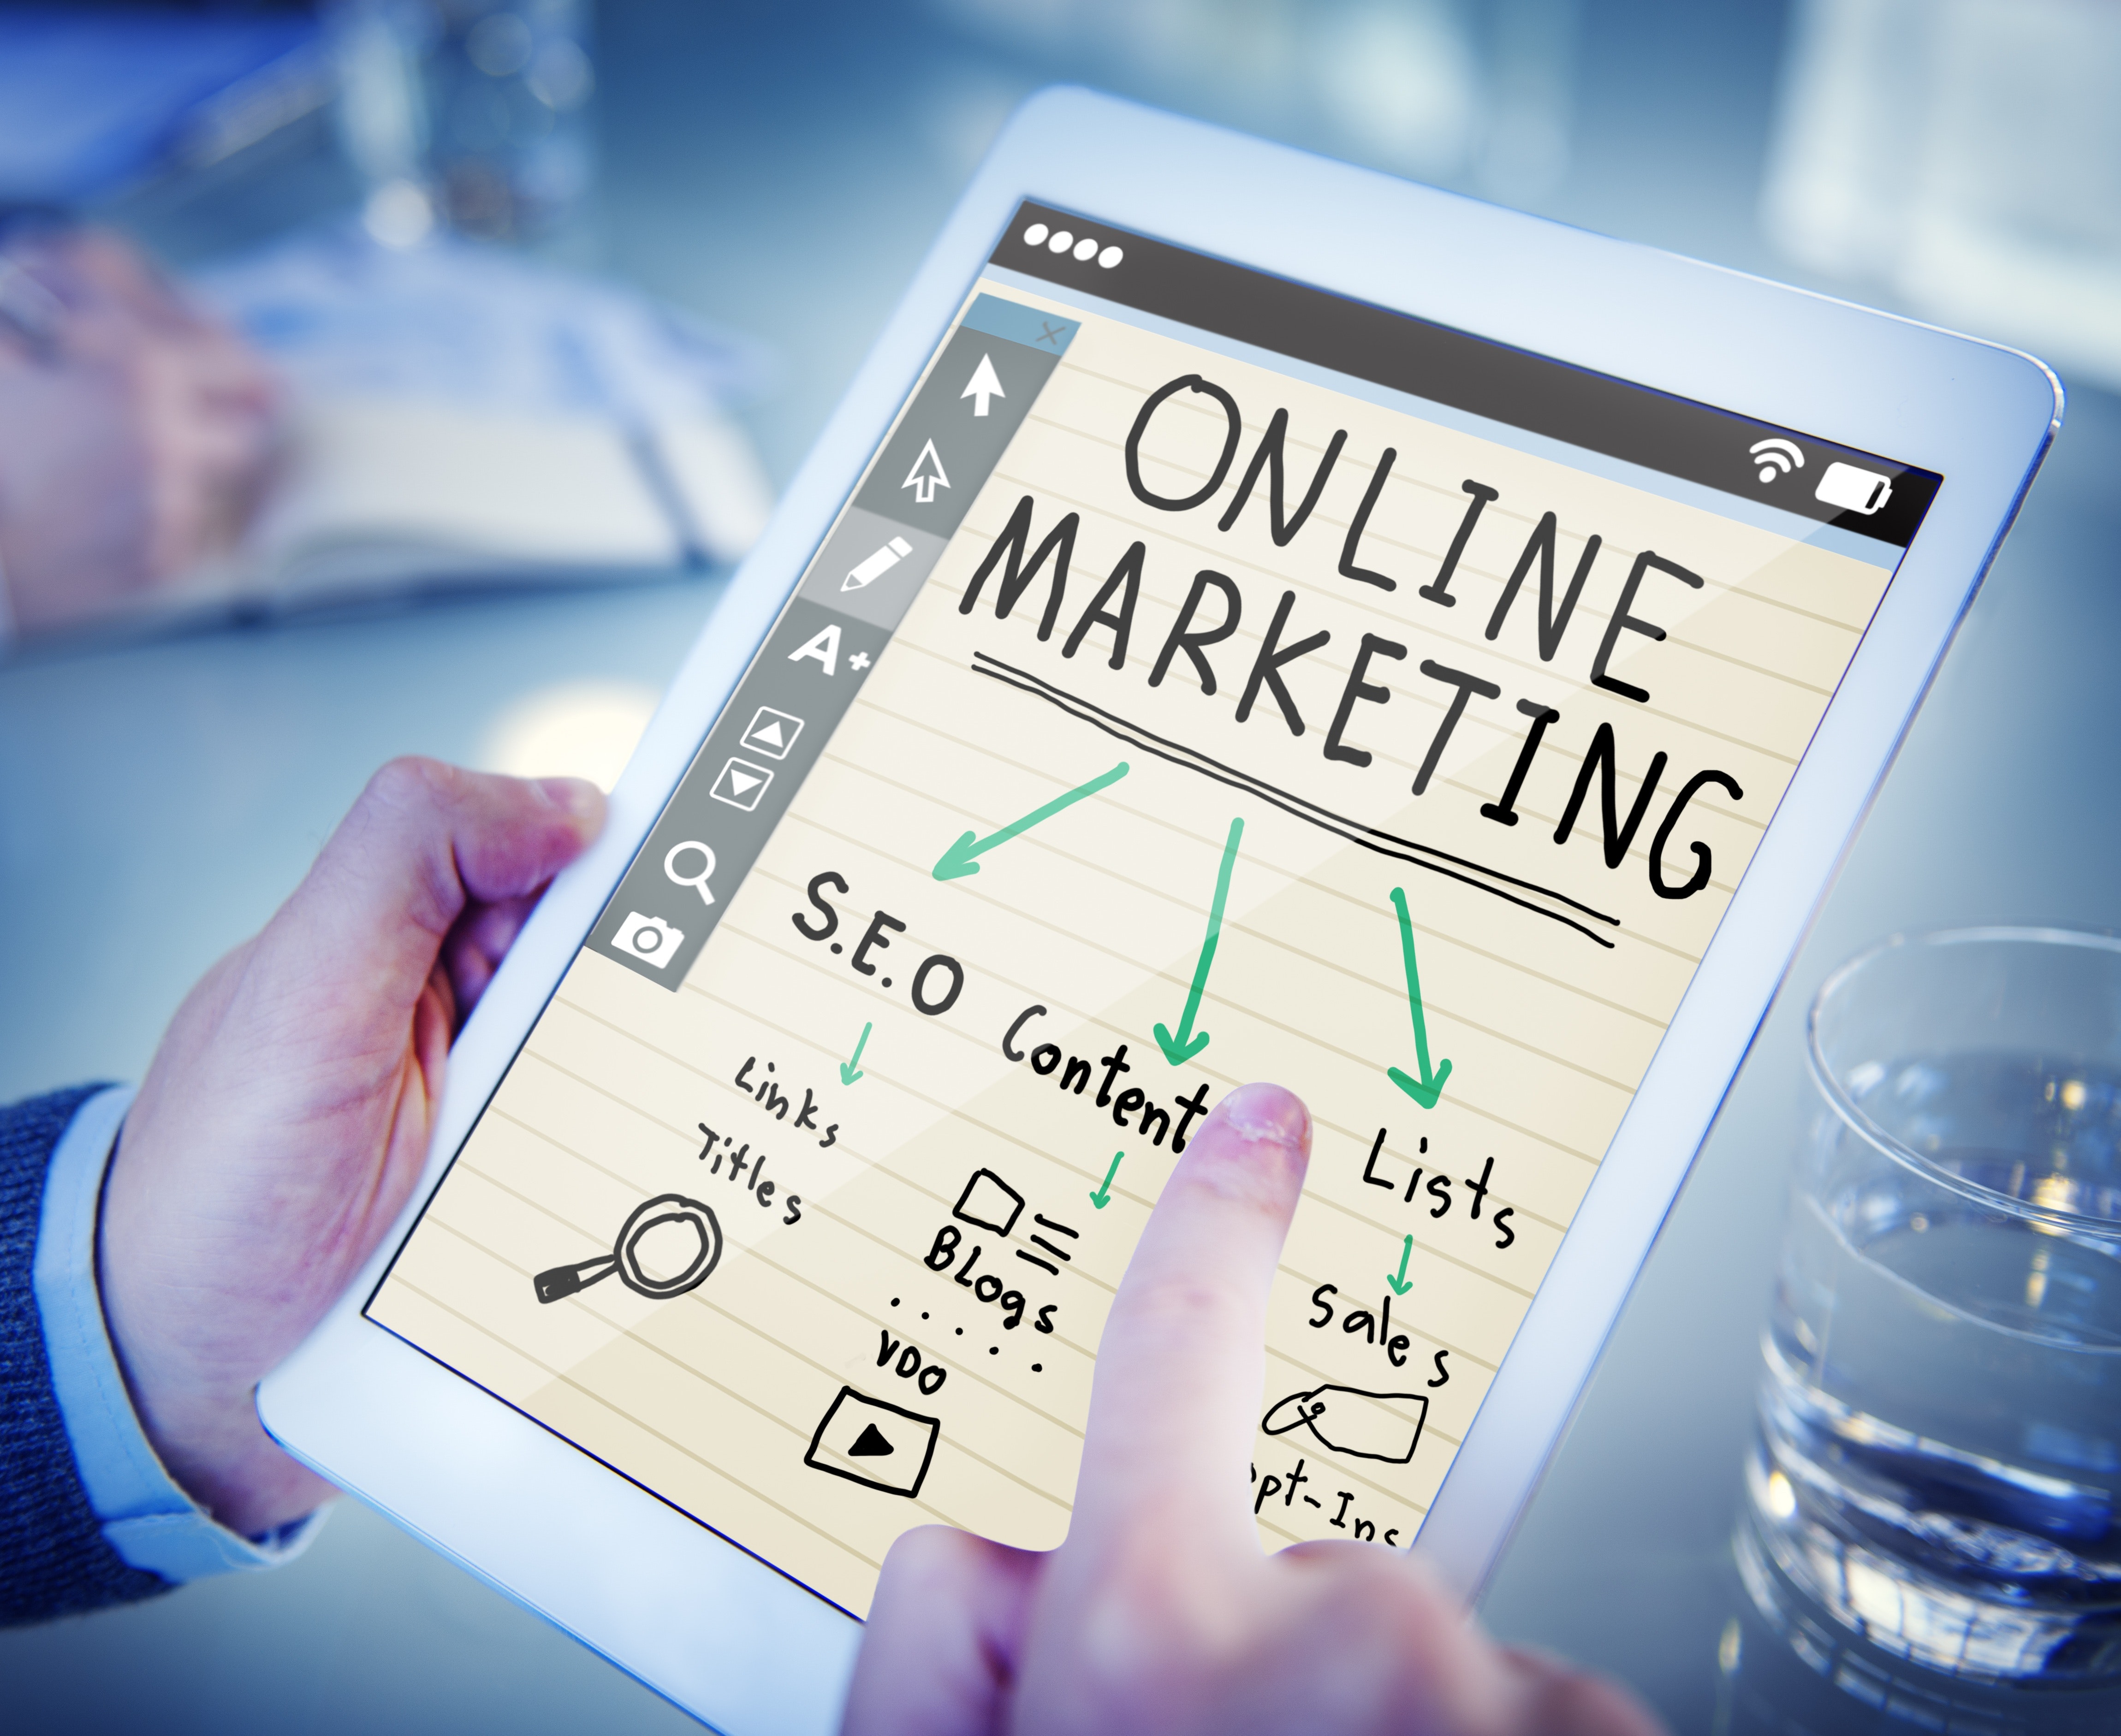 5 Marketing Tools To Grow Your Business